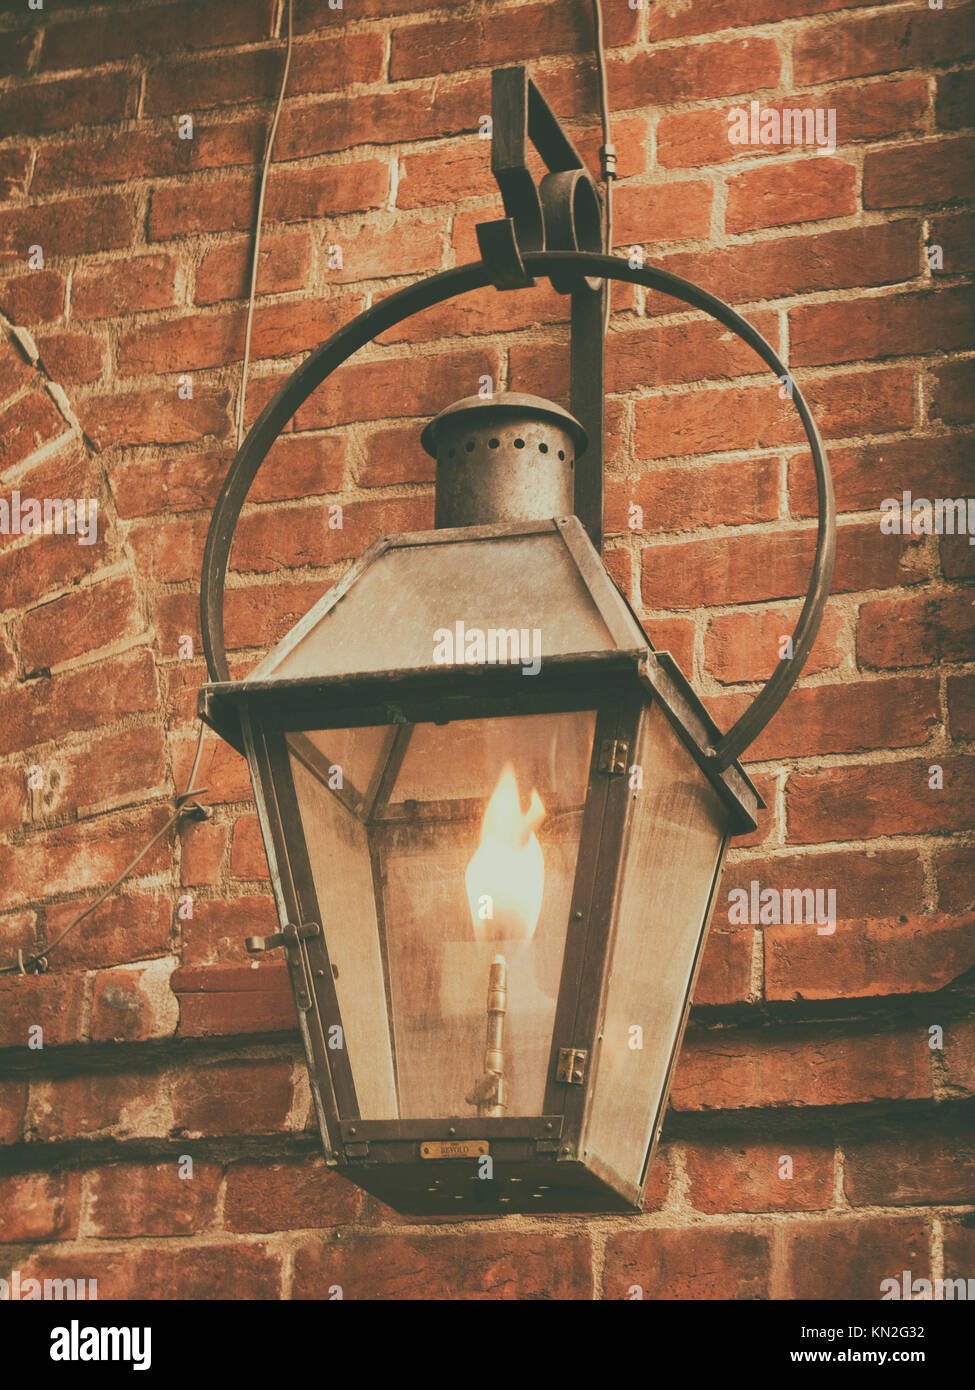 Old Gas Lamp, Free stock photos - Rgbstock - Free stock images, vierdrie